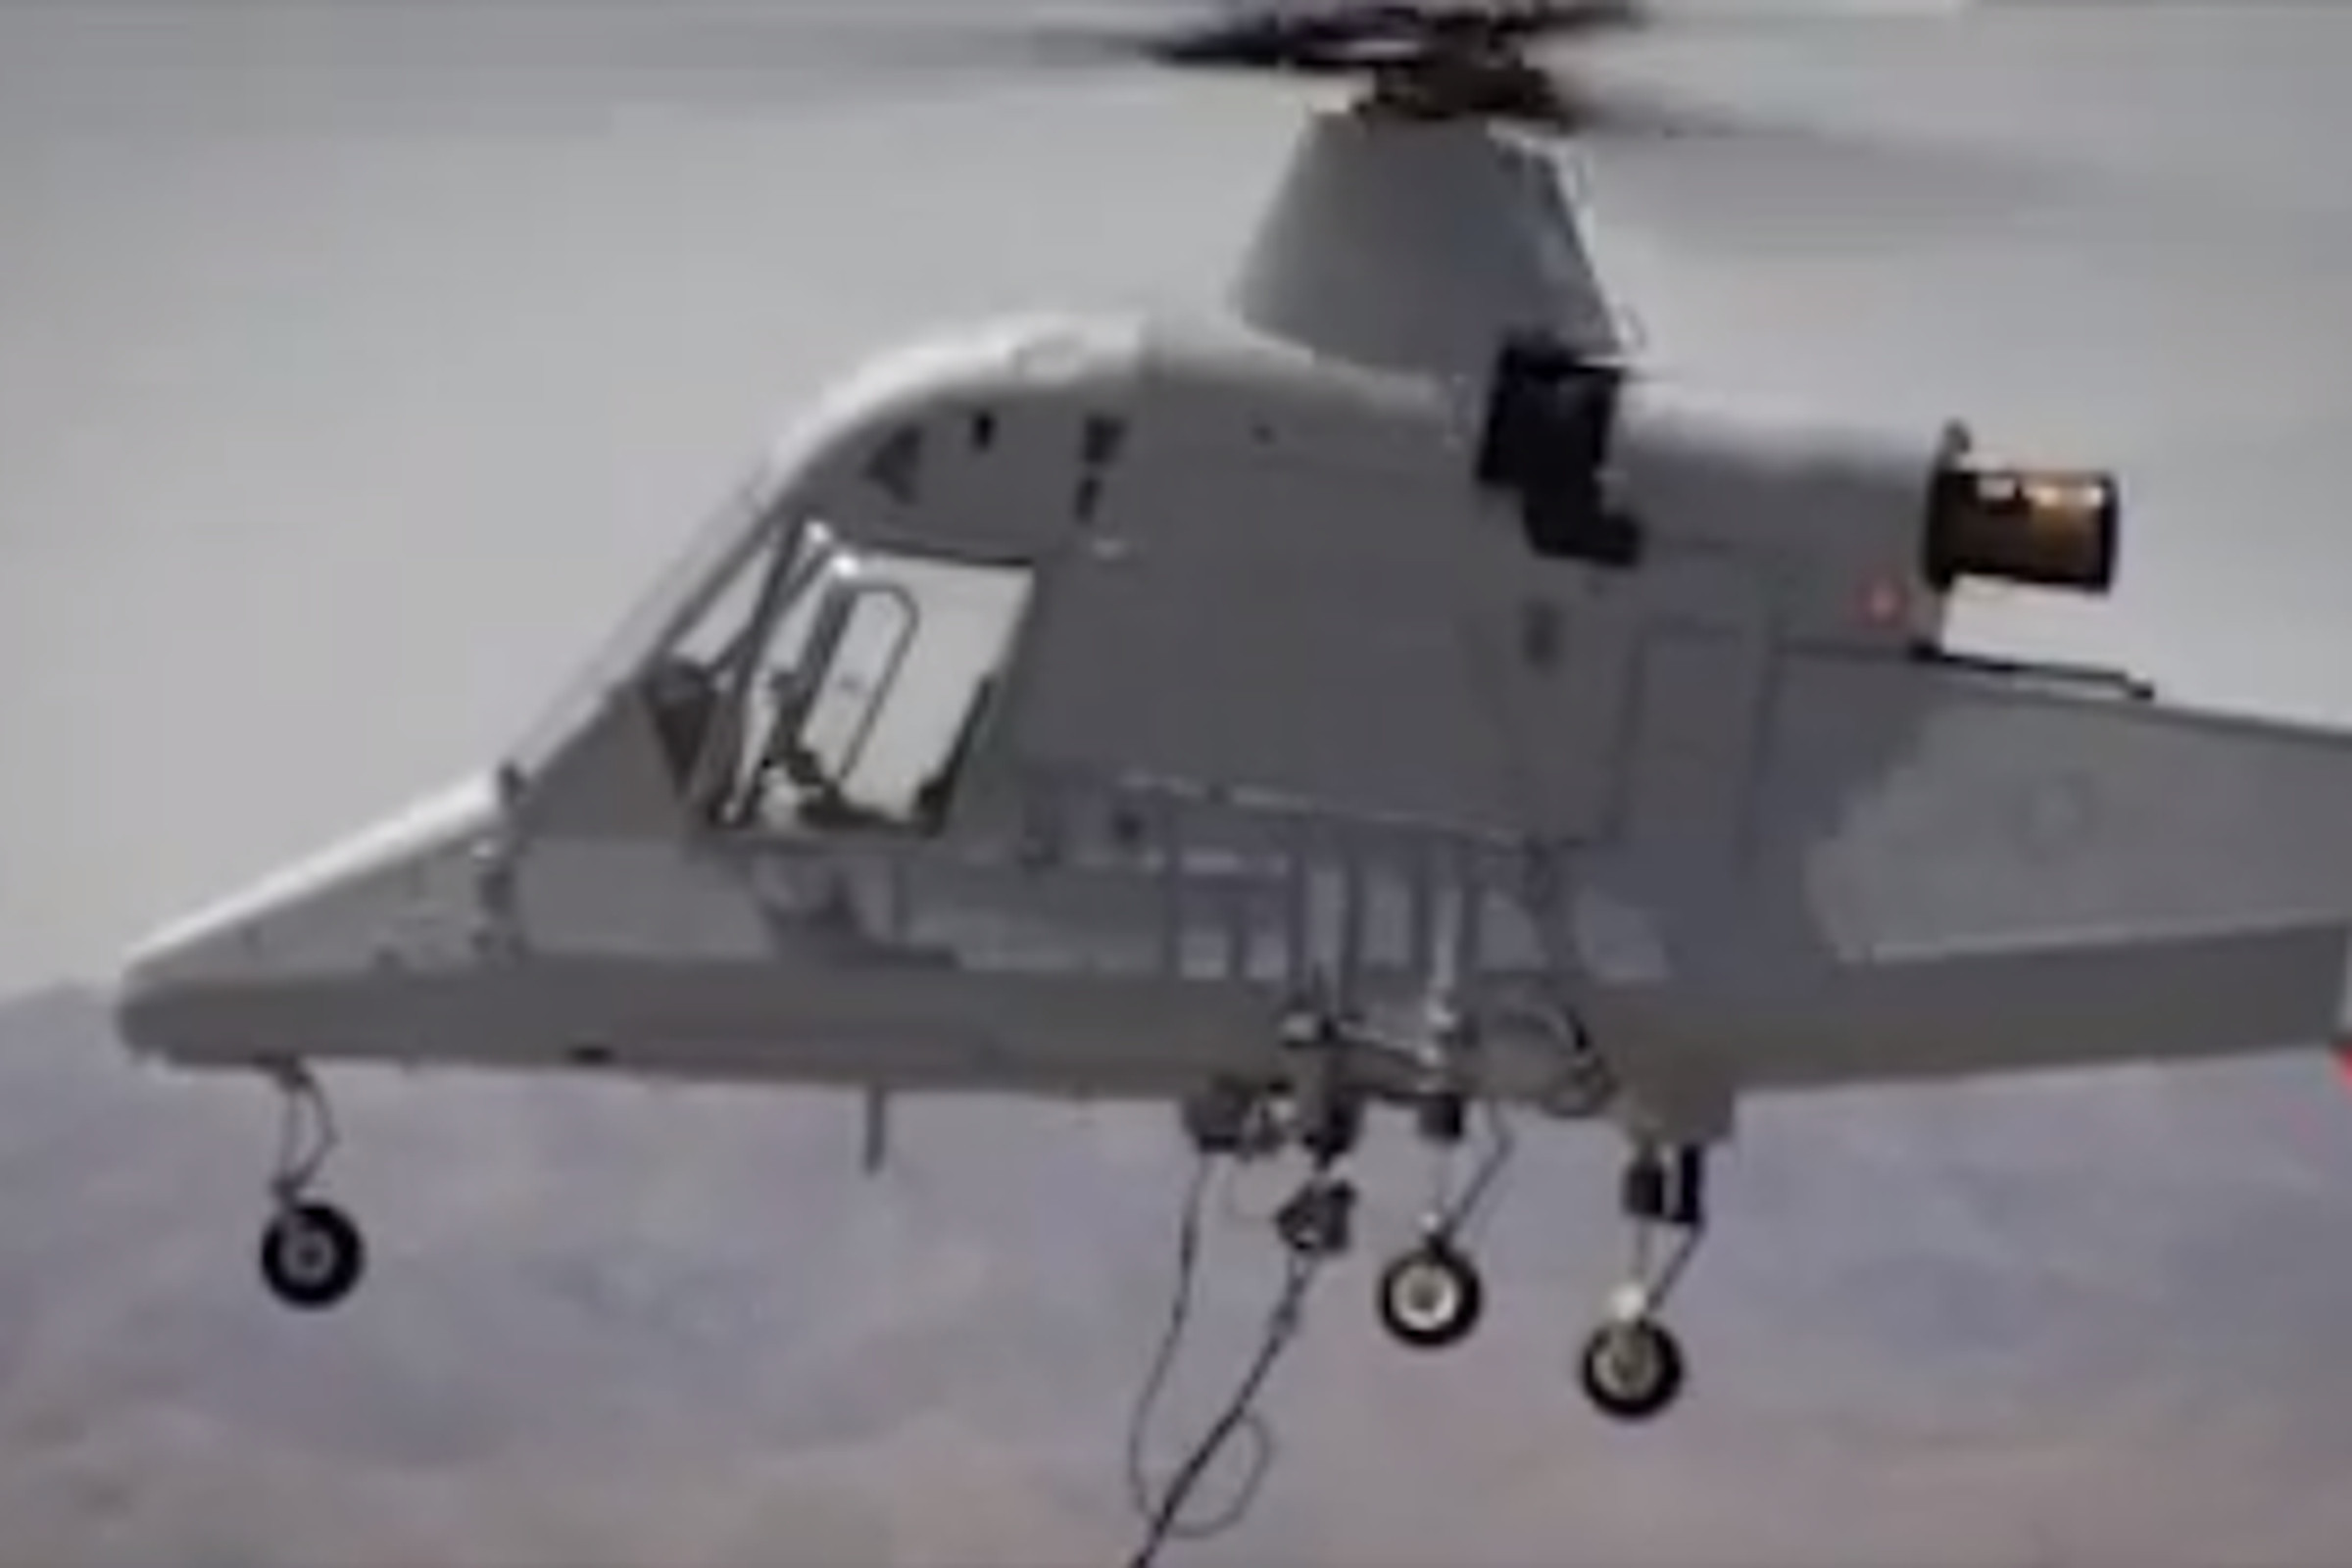 Kaman Unmanned Helicopter